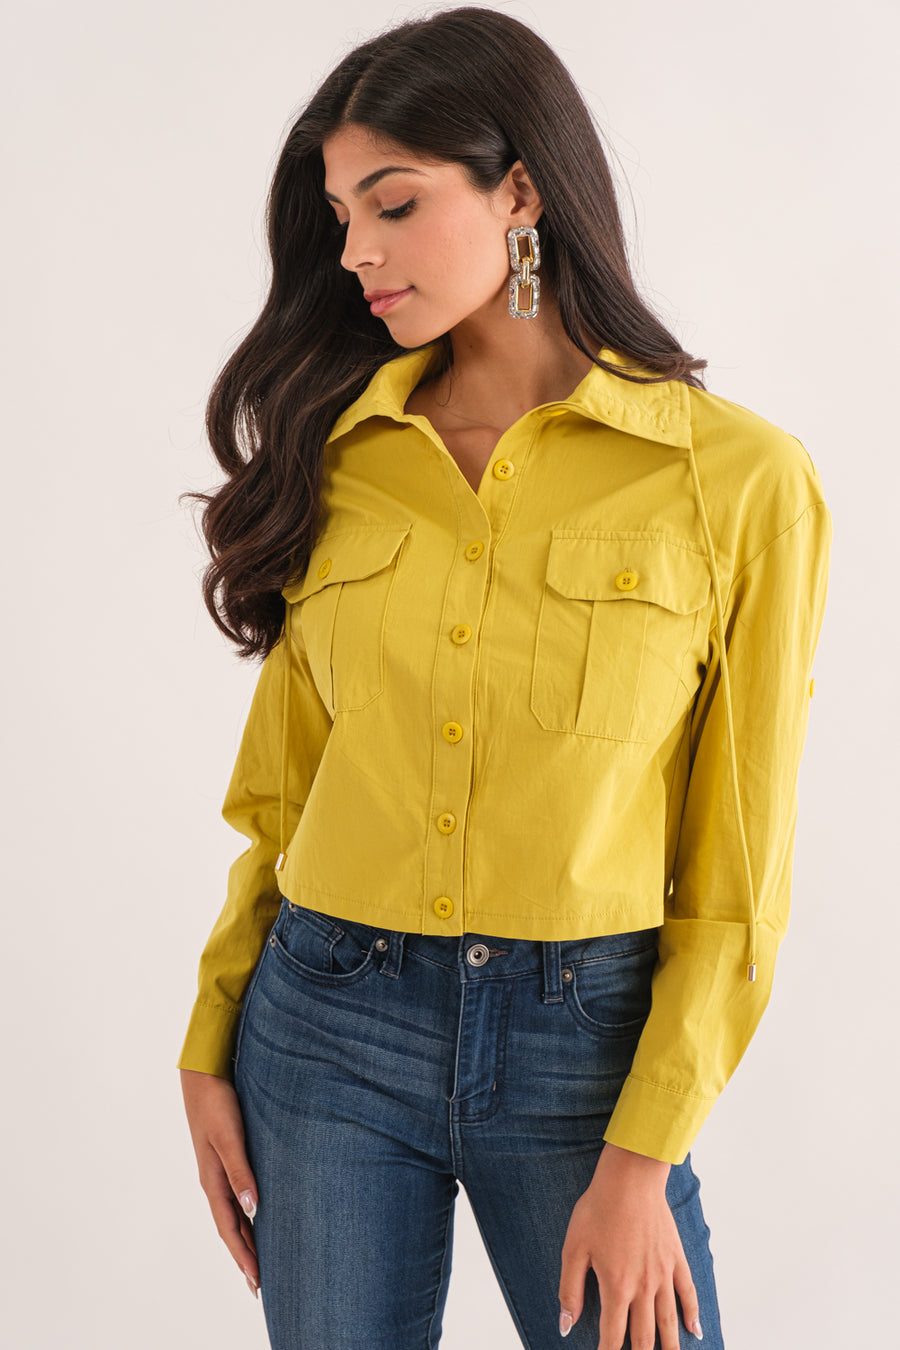 TCH9075-Long sleeve utility button up top